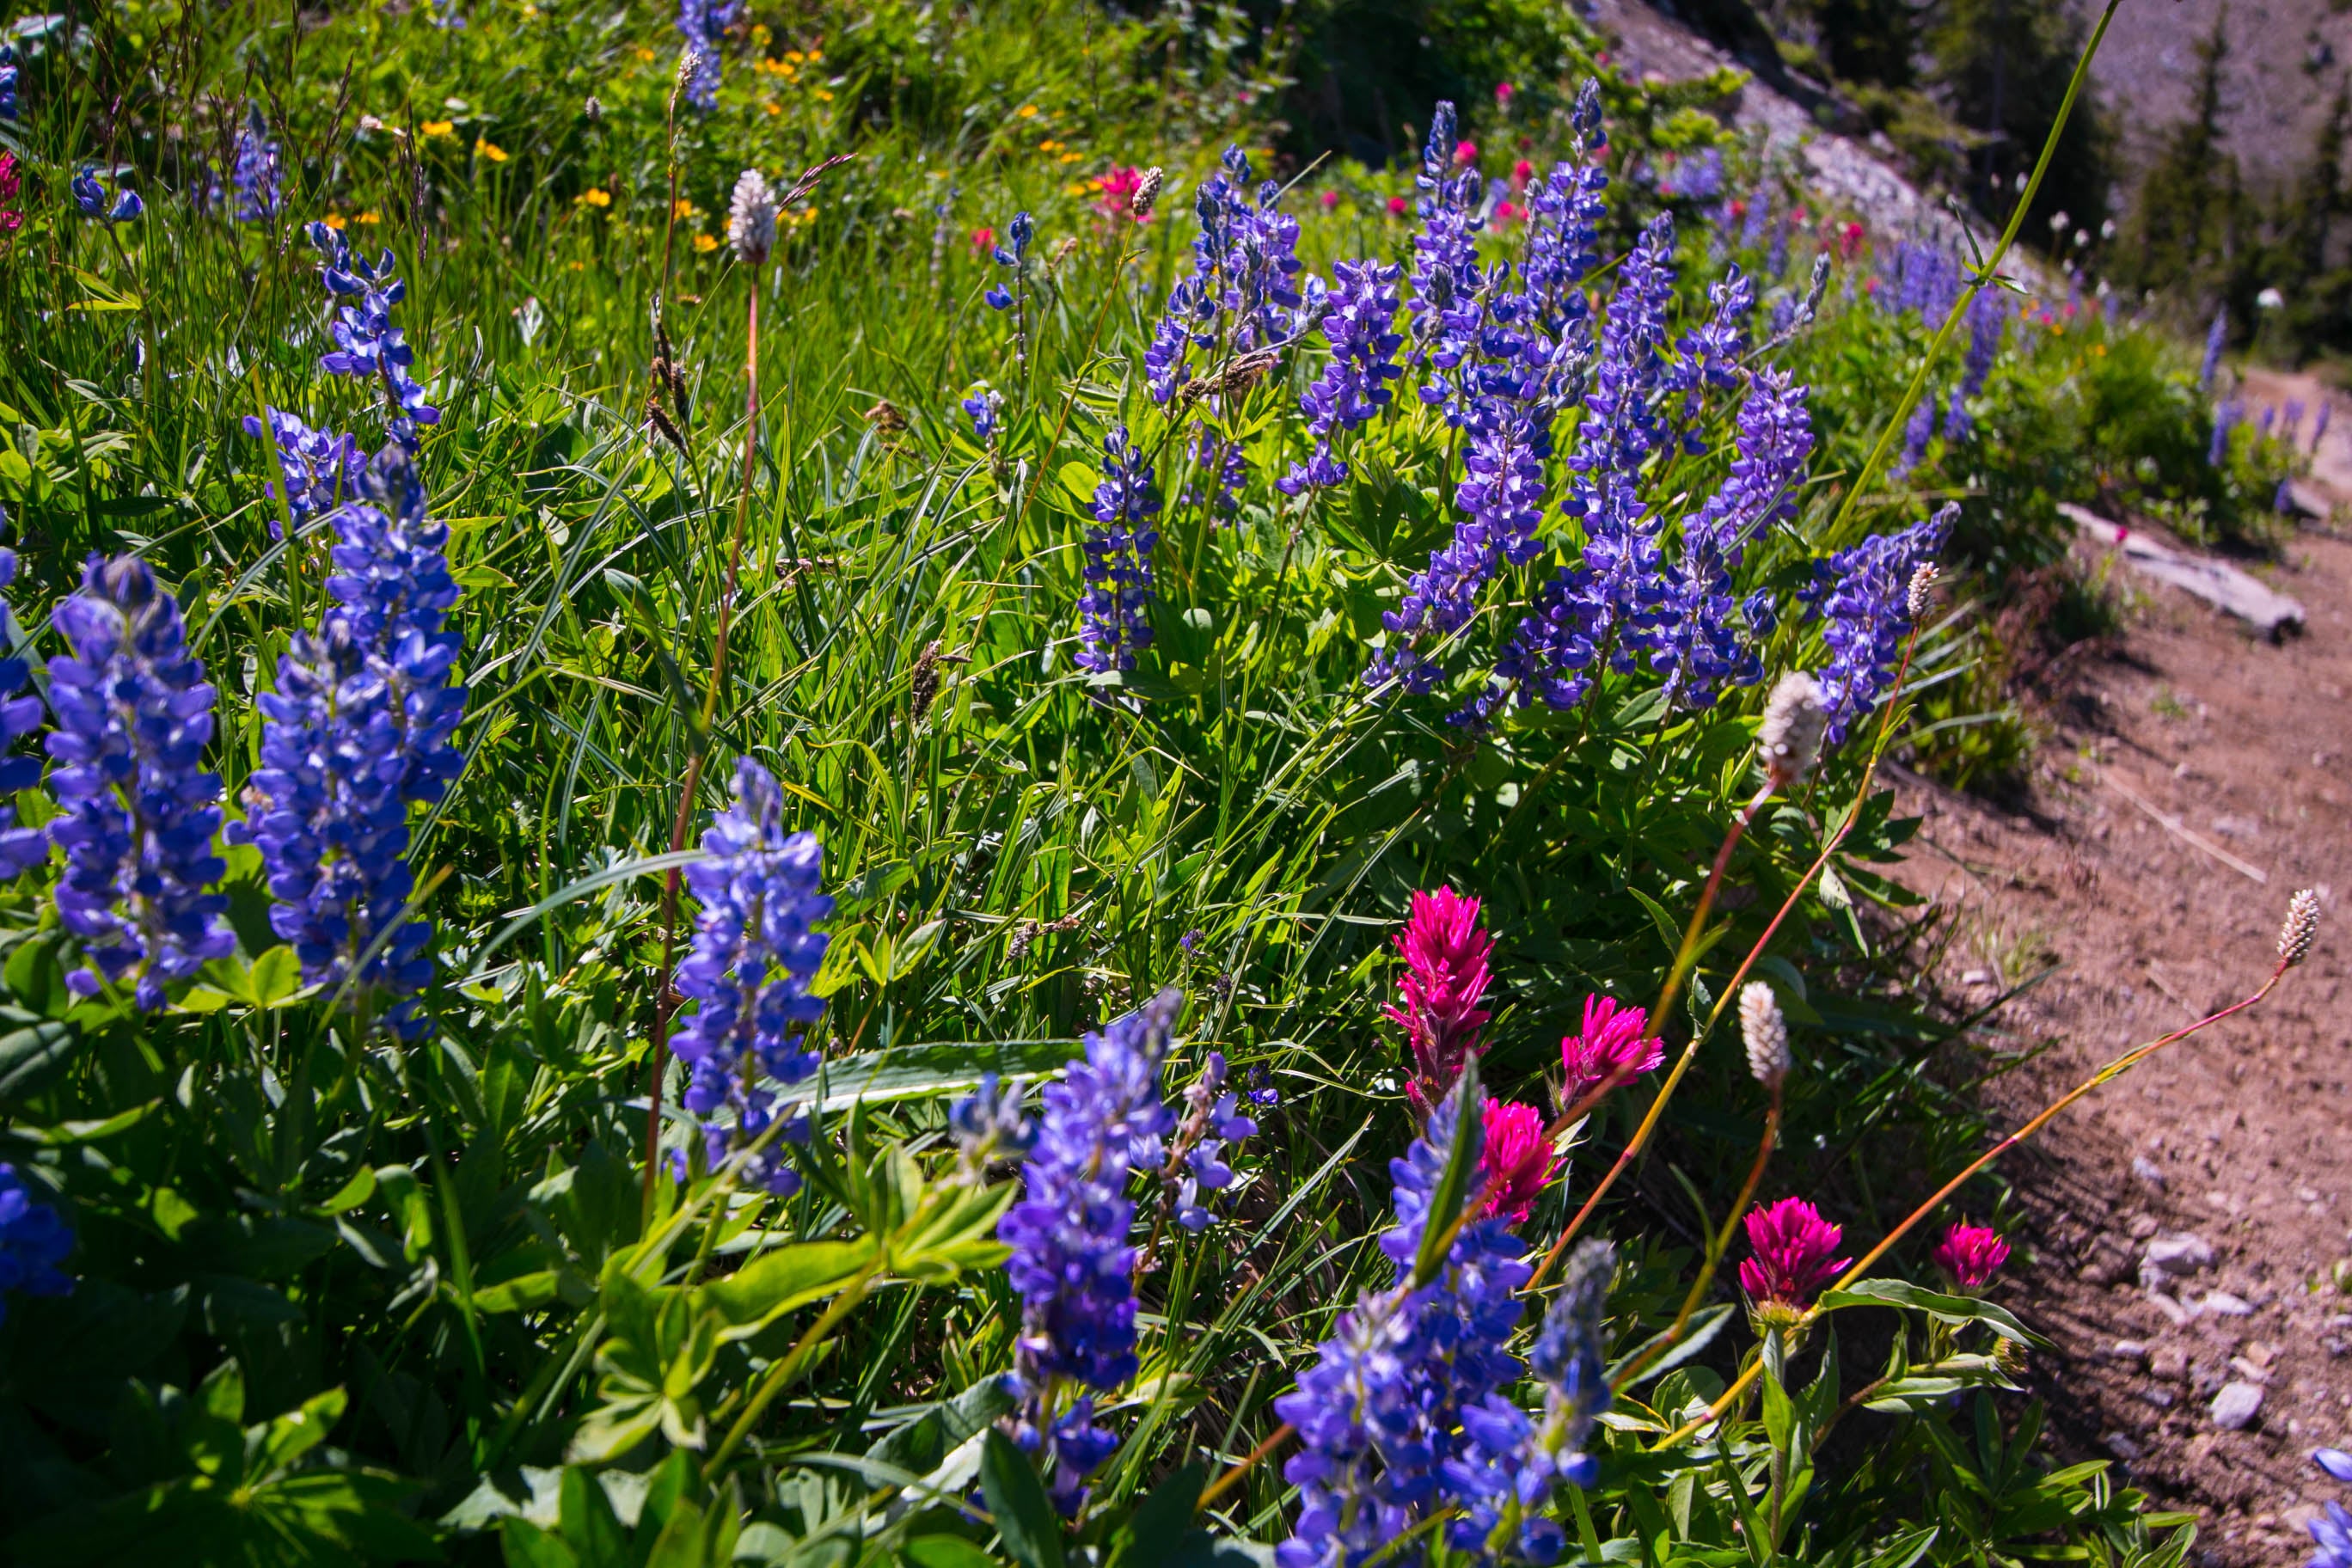 The trail leading to the campground.  Loved the flowers.